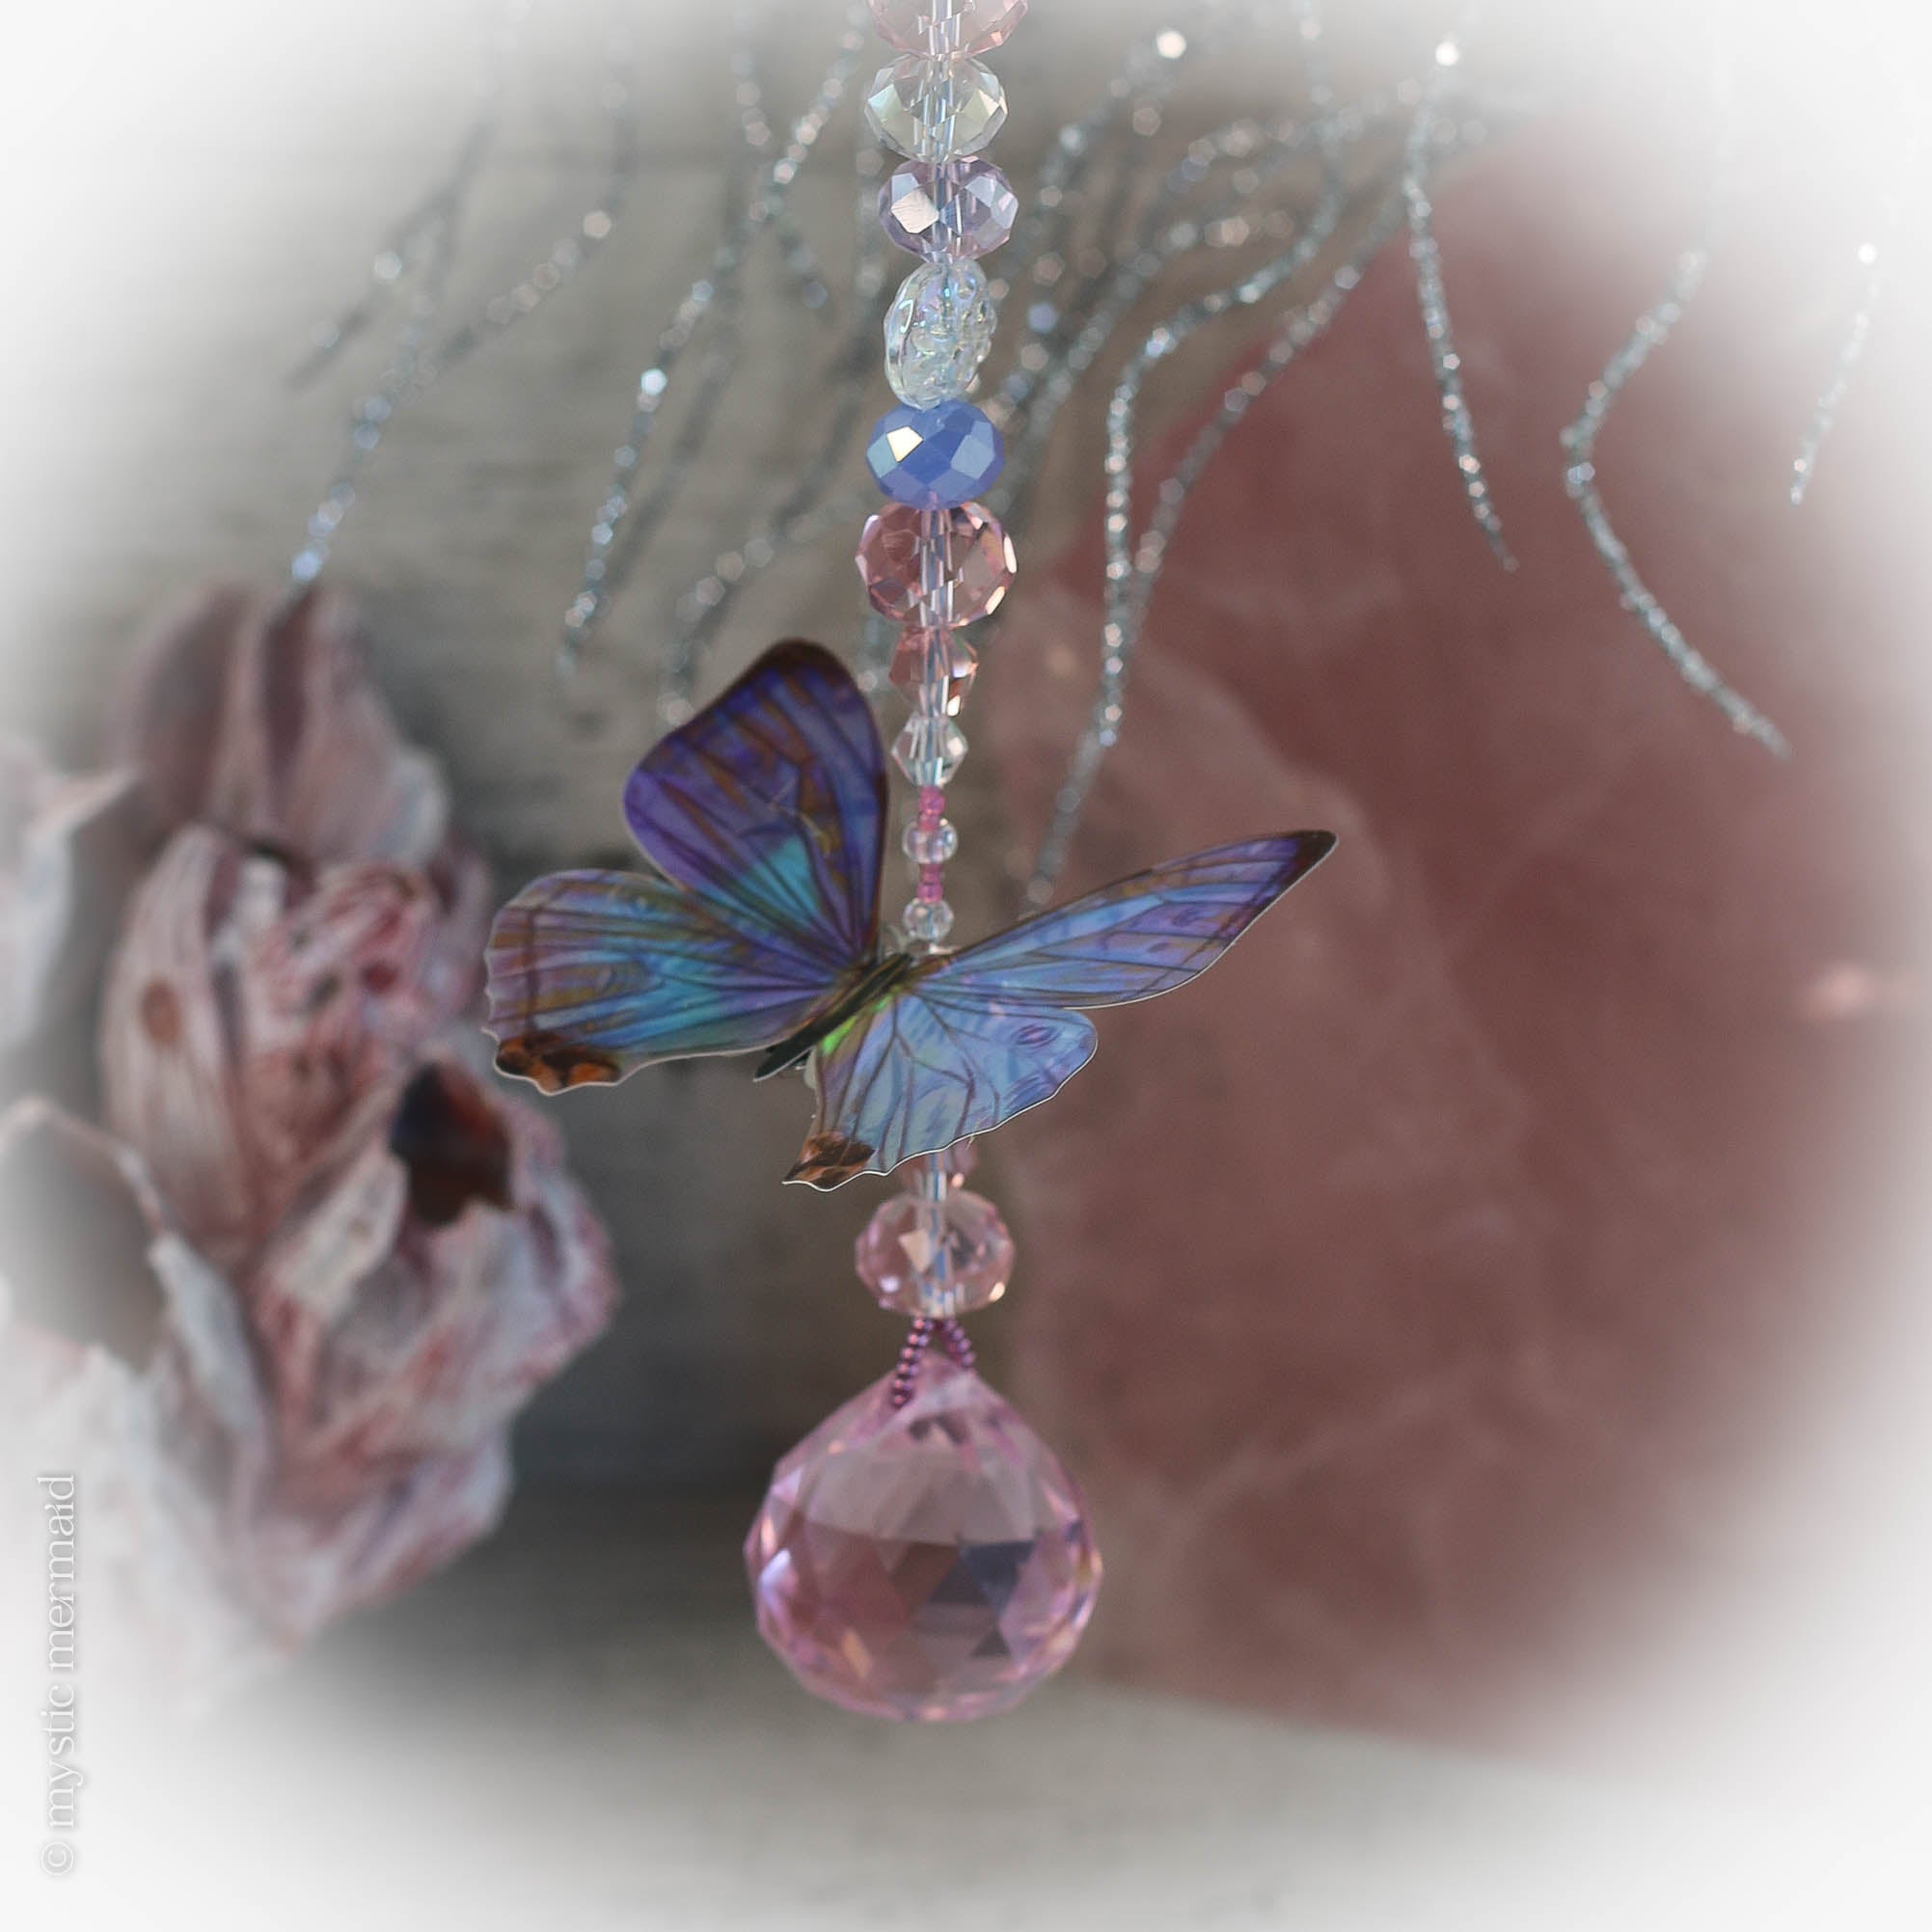 Flutter of Love - Holographic Butterfly SunCatcher by Mystic Mermaid